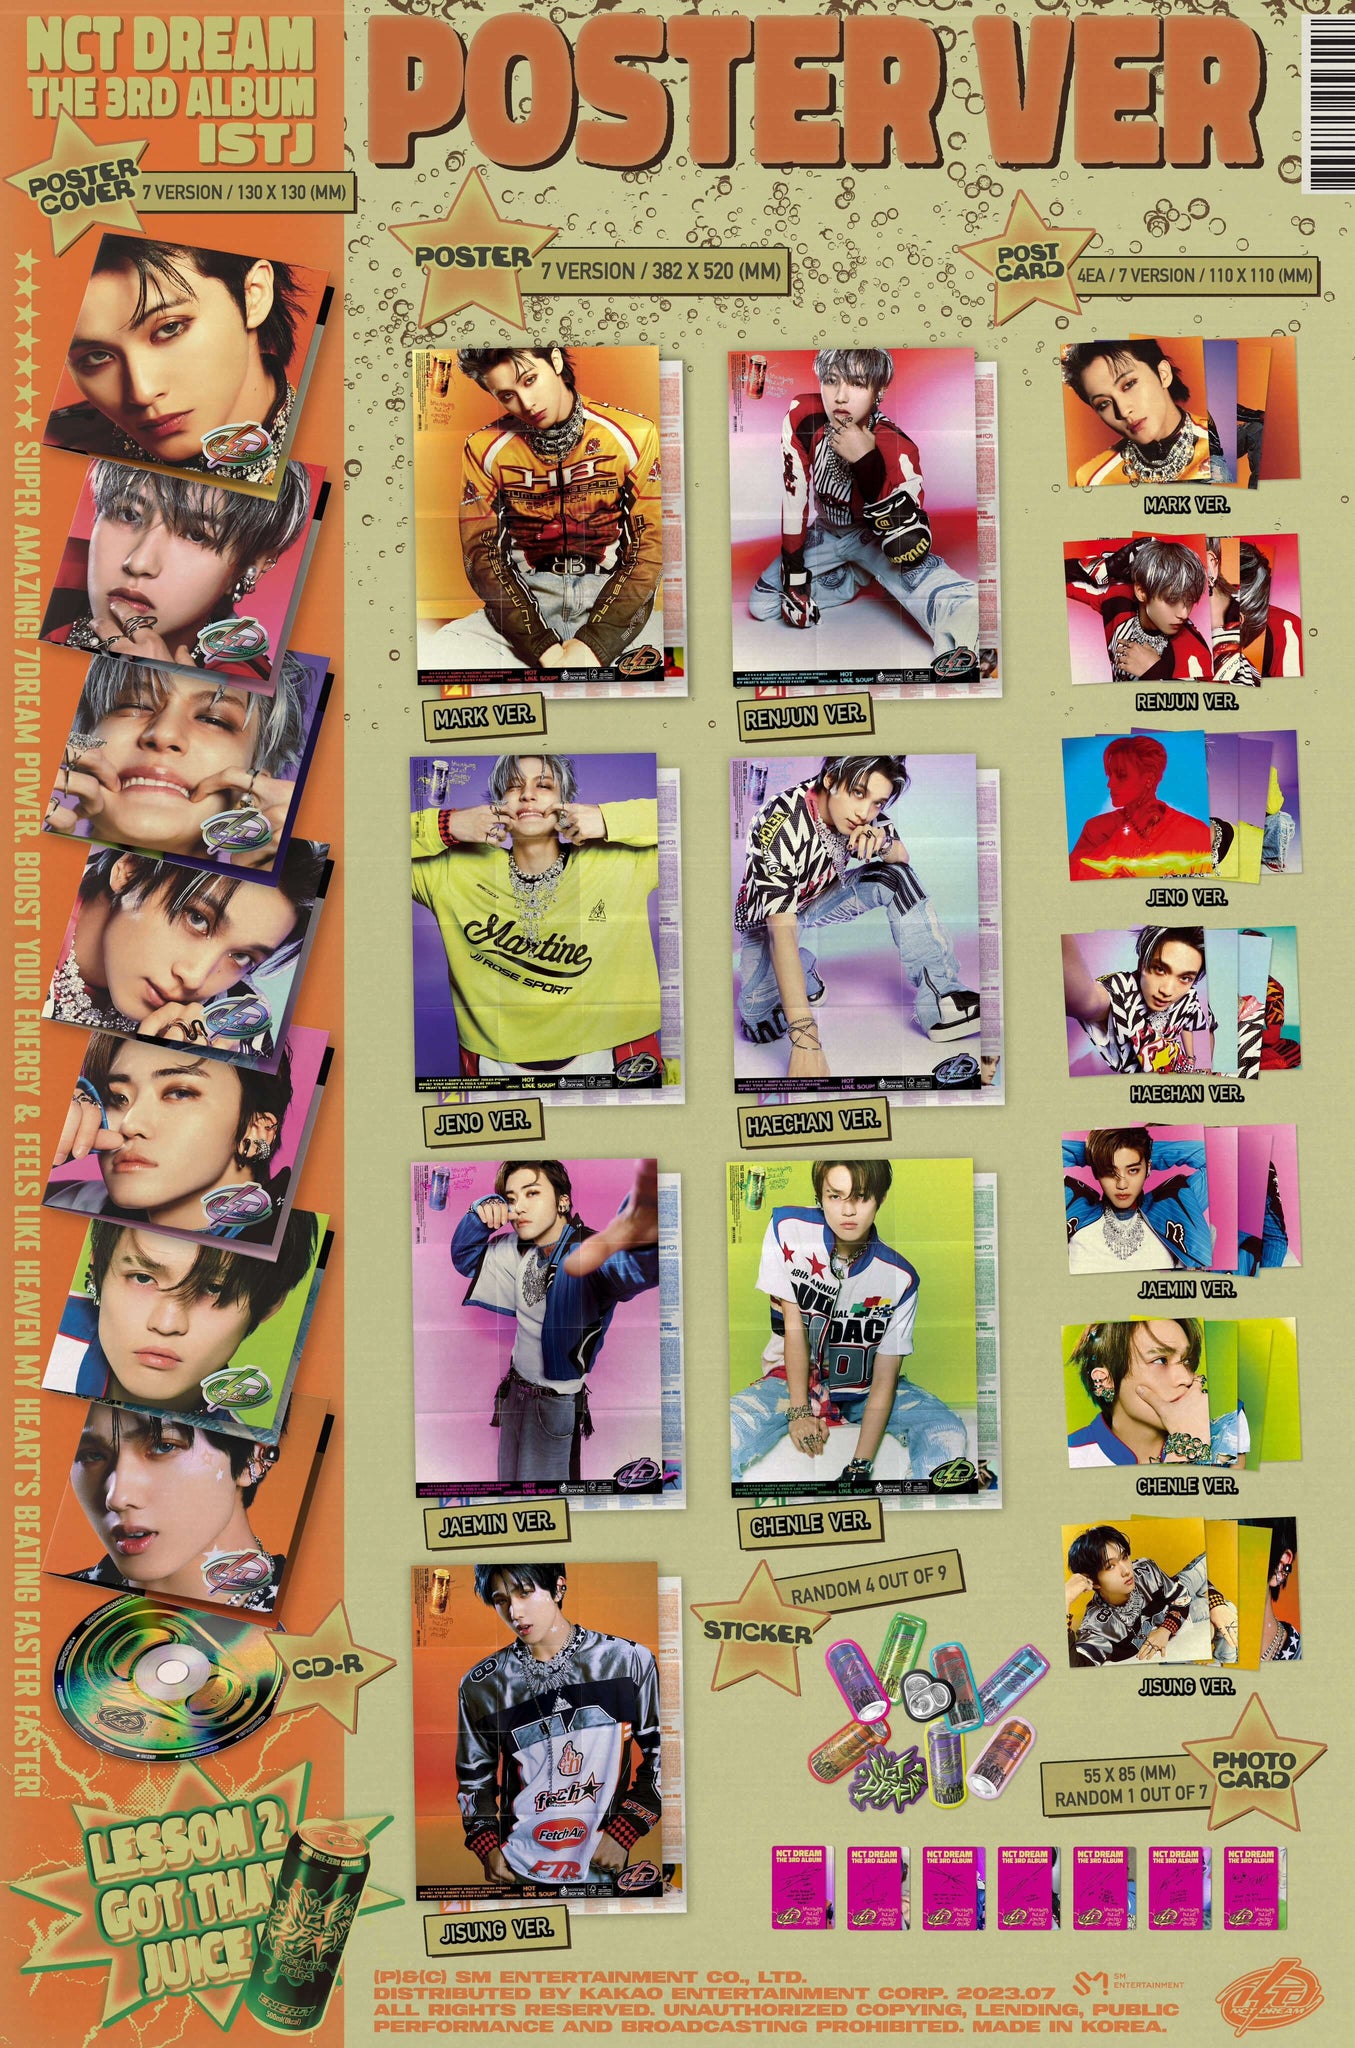 NCT DREAM ISTJ - Poster Version Inclusions Poster Cover CD Poster Postcards Stickers Photocard